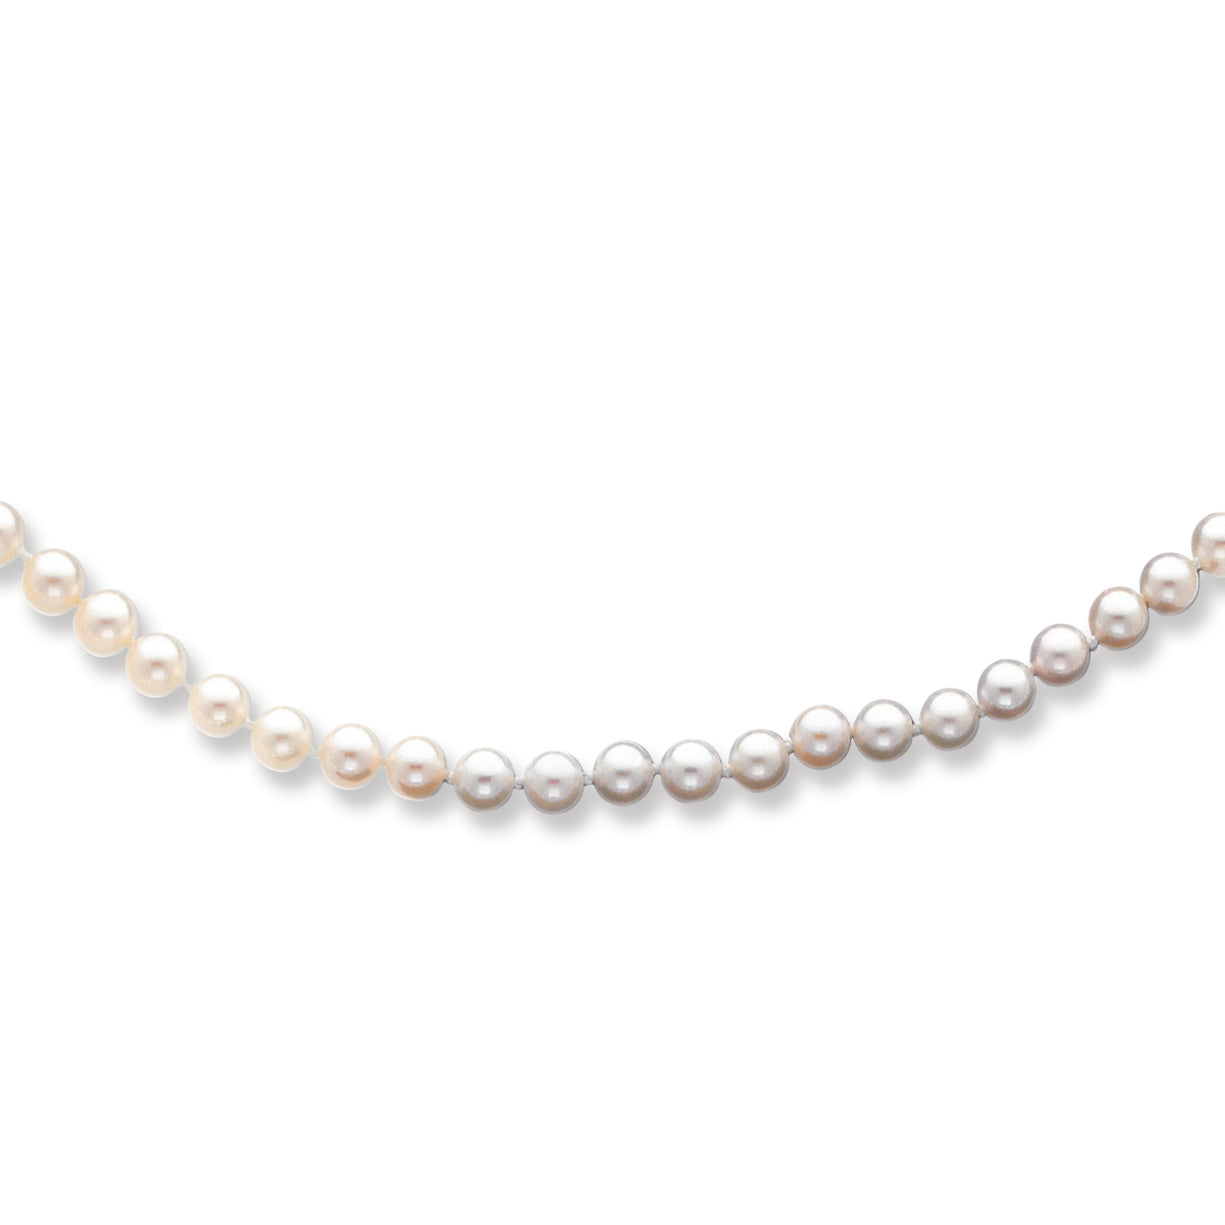 14K Gold 5-5.5mm White Akoya Saltwater Cultured Pearl Necklace 16 Inches